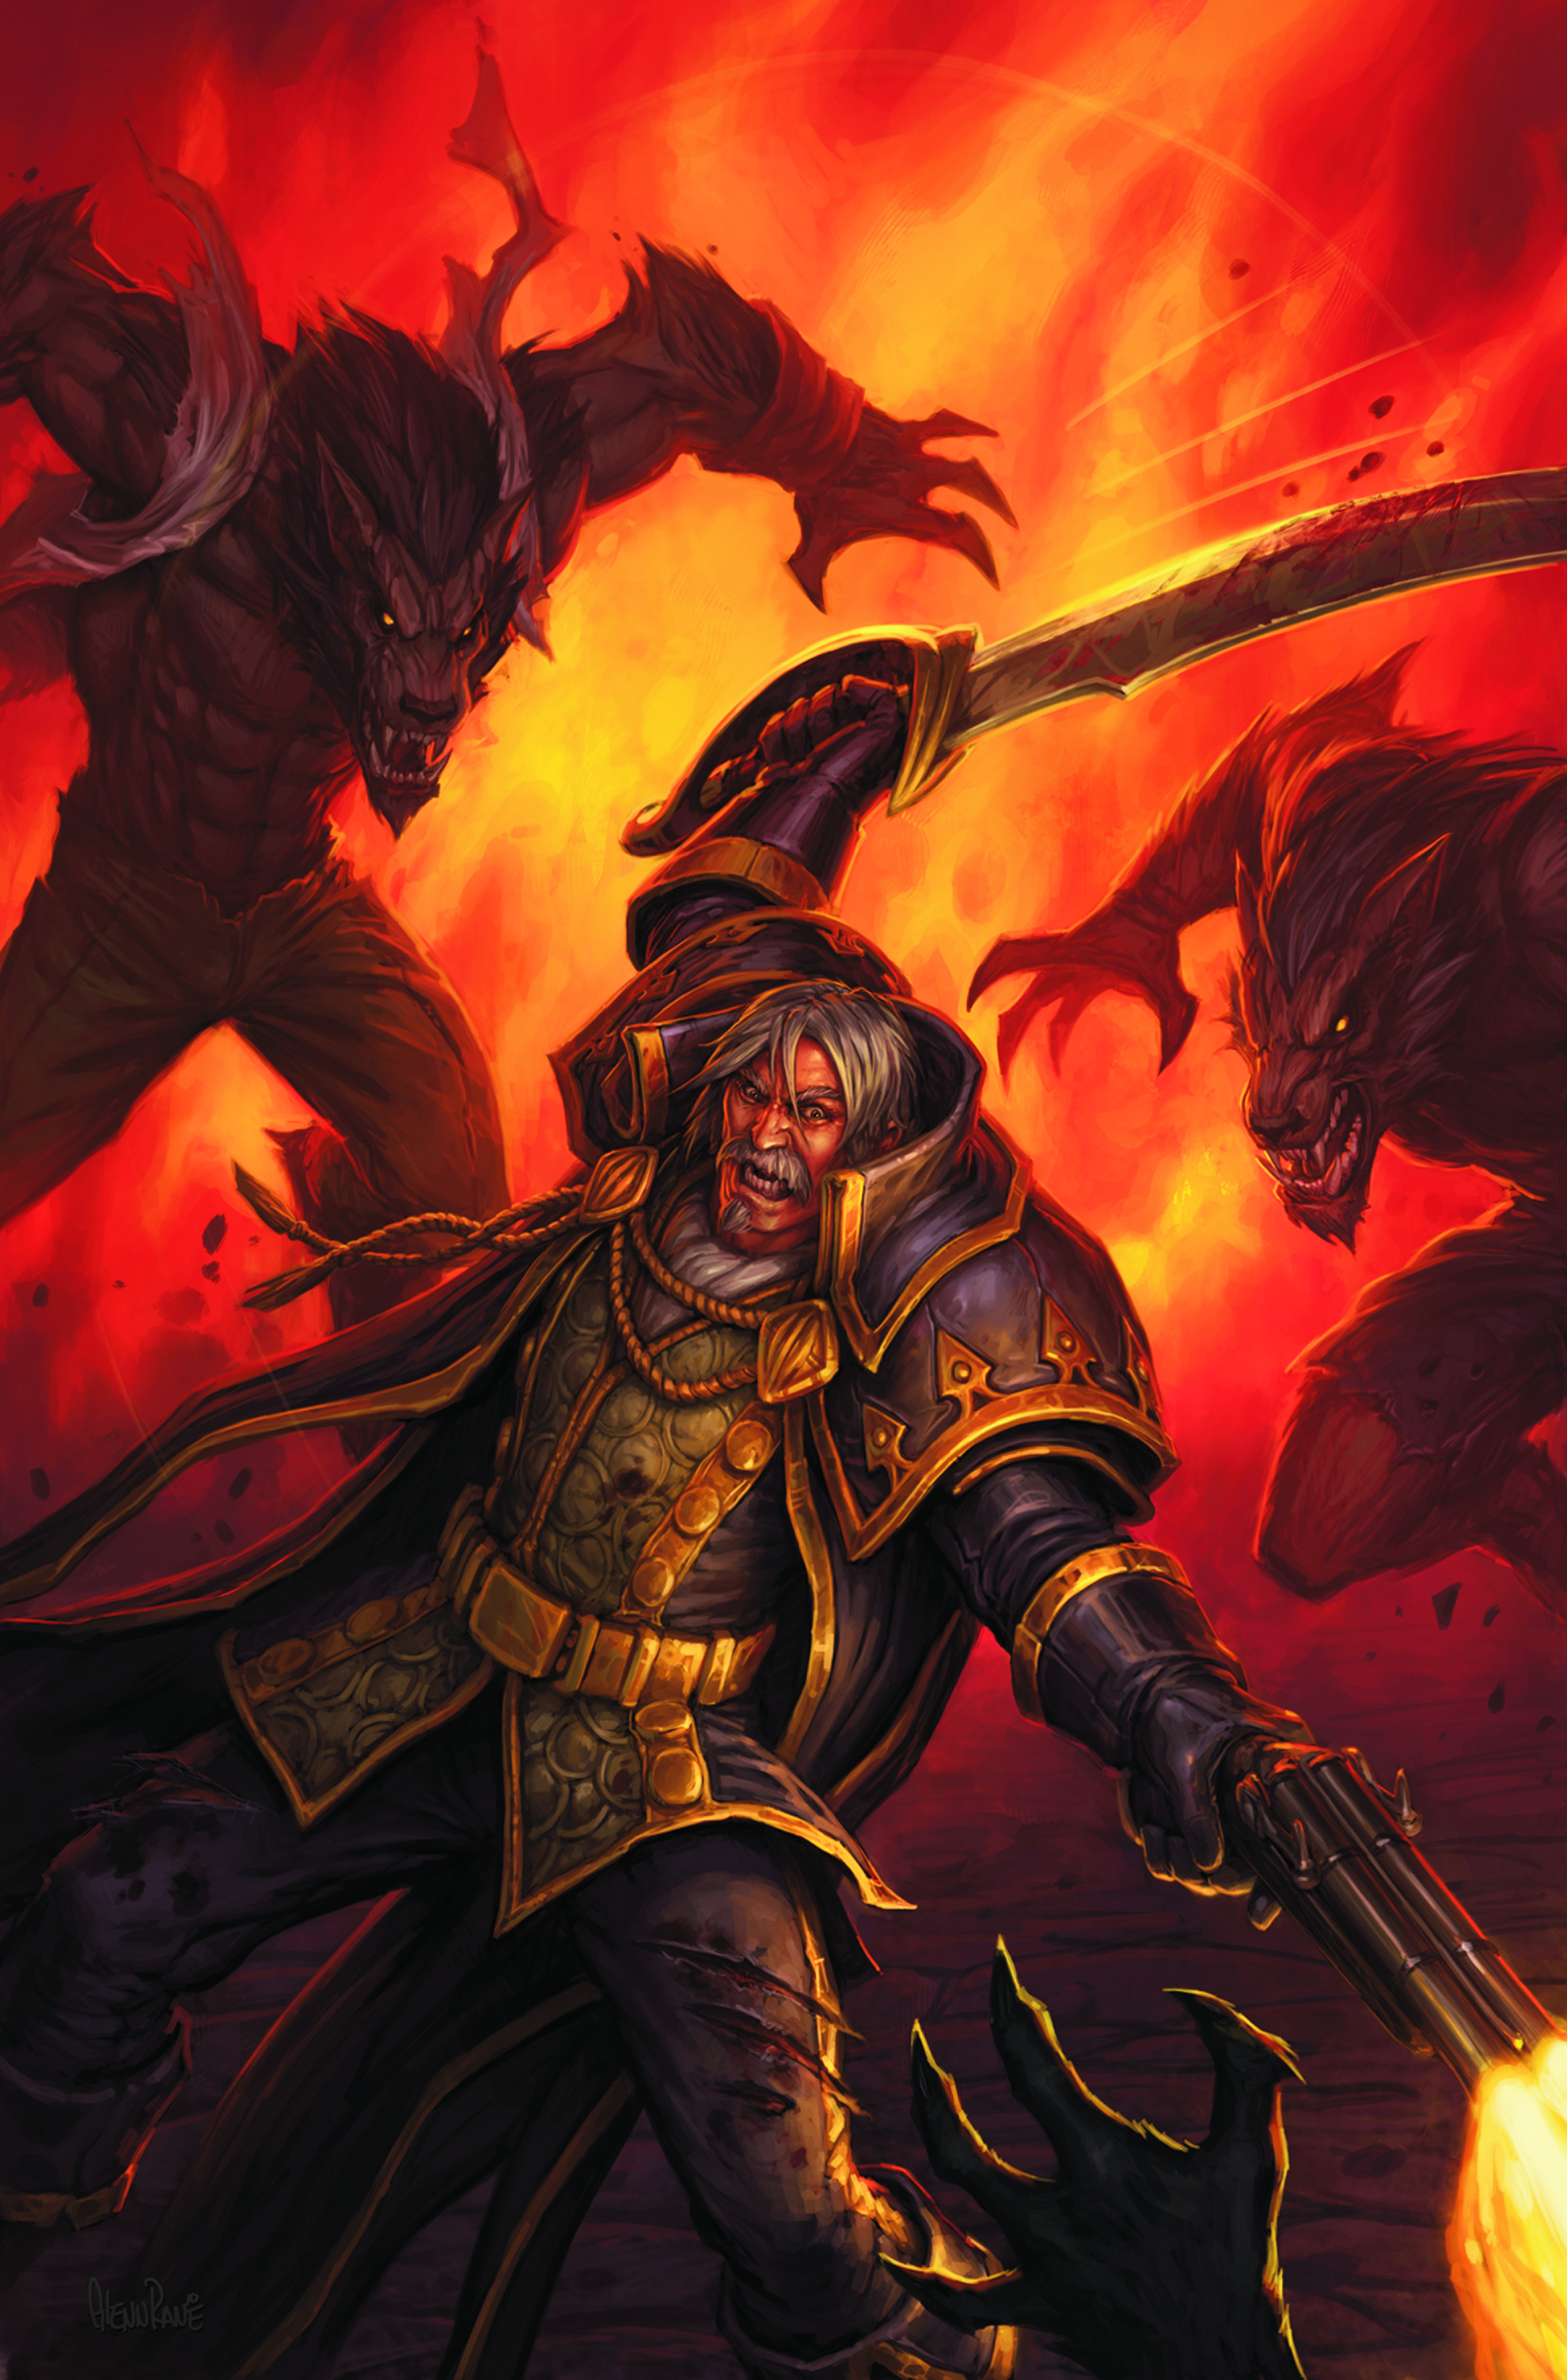 WORLD OF WARCRAFT CURSE OF THE WORGEN #4 (OF 5)